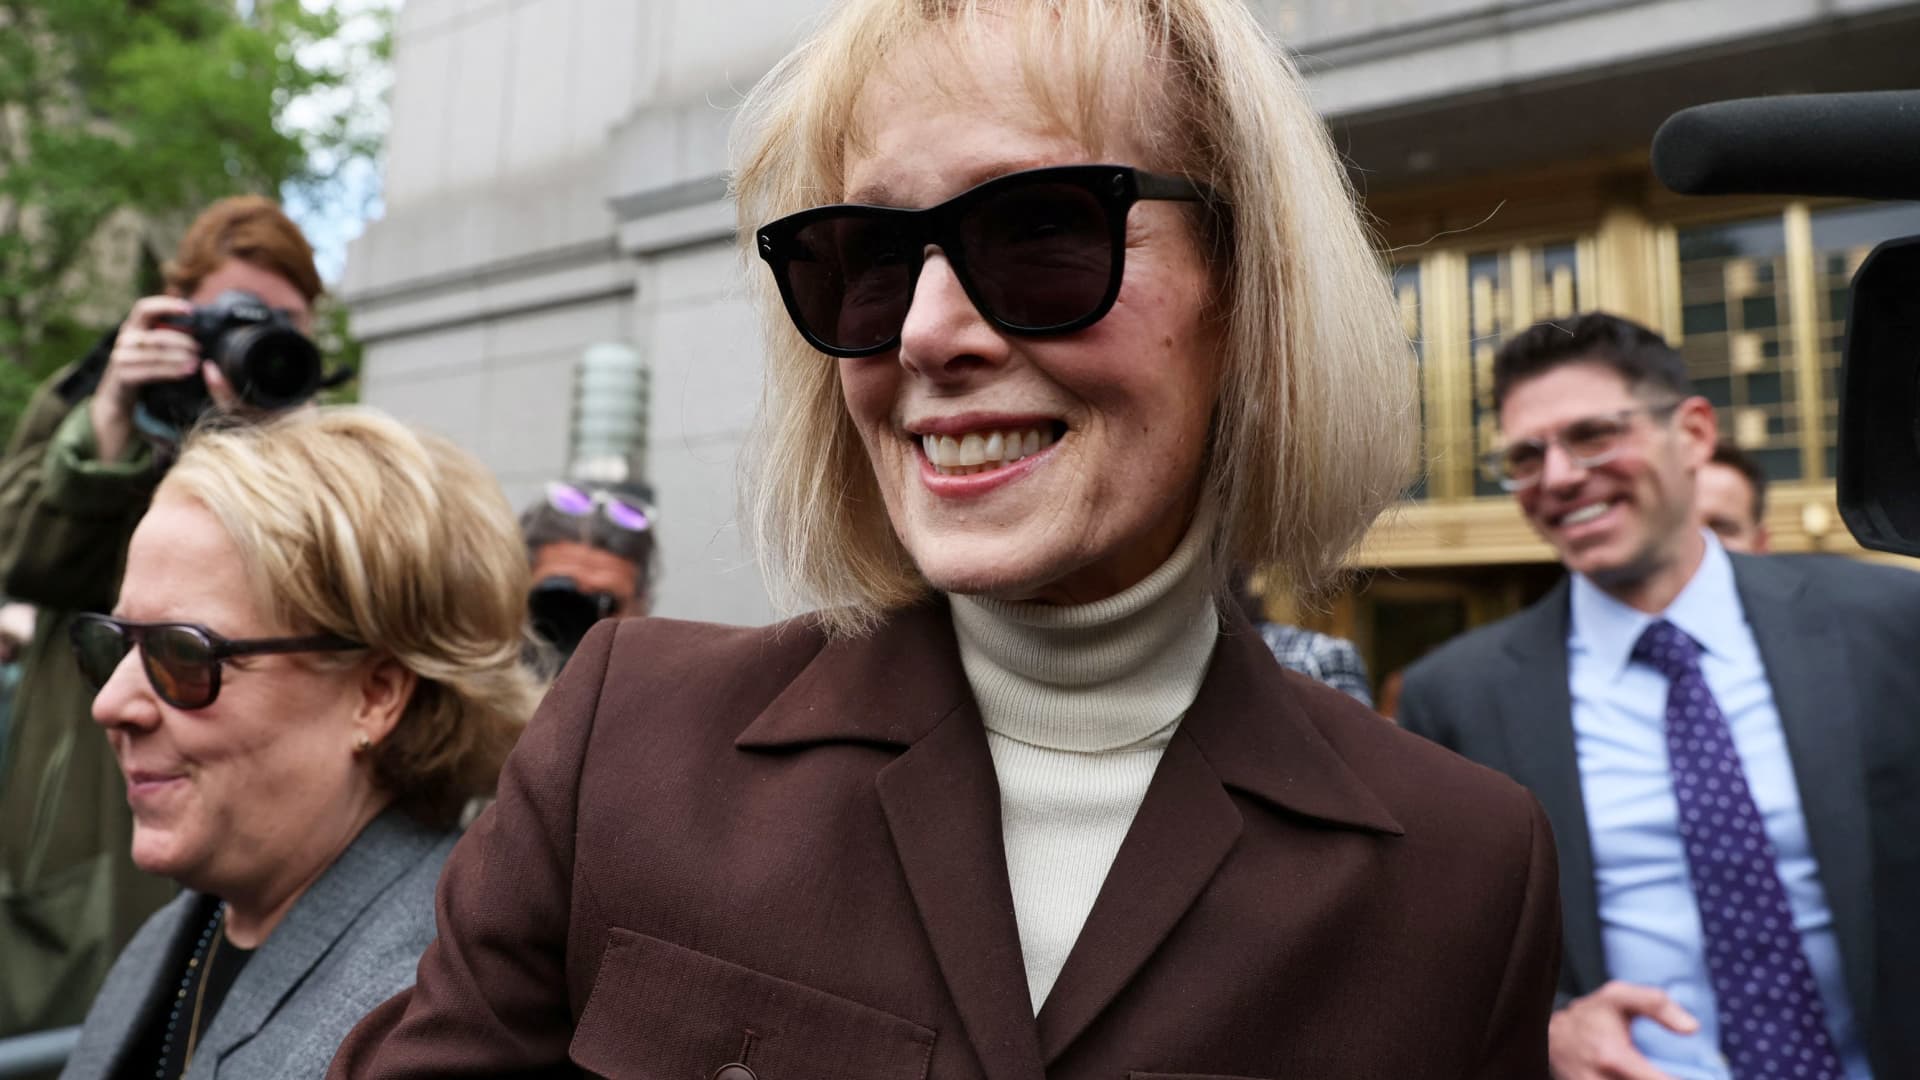 Trump loses bid for new trial on damages in E. Jean Carroll sexual abuse, defamation case